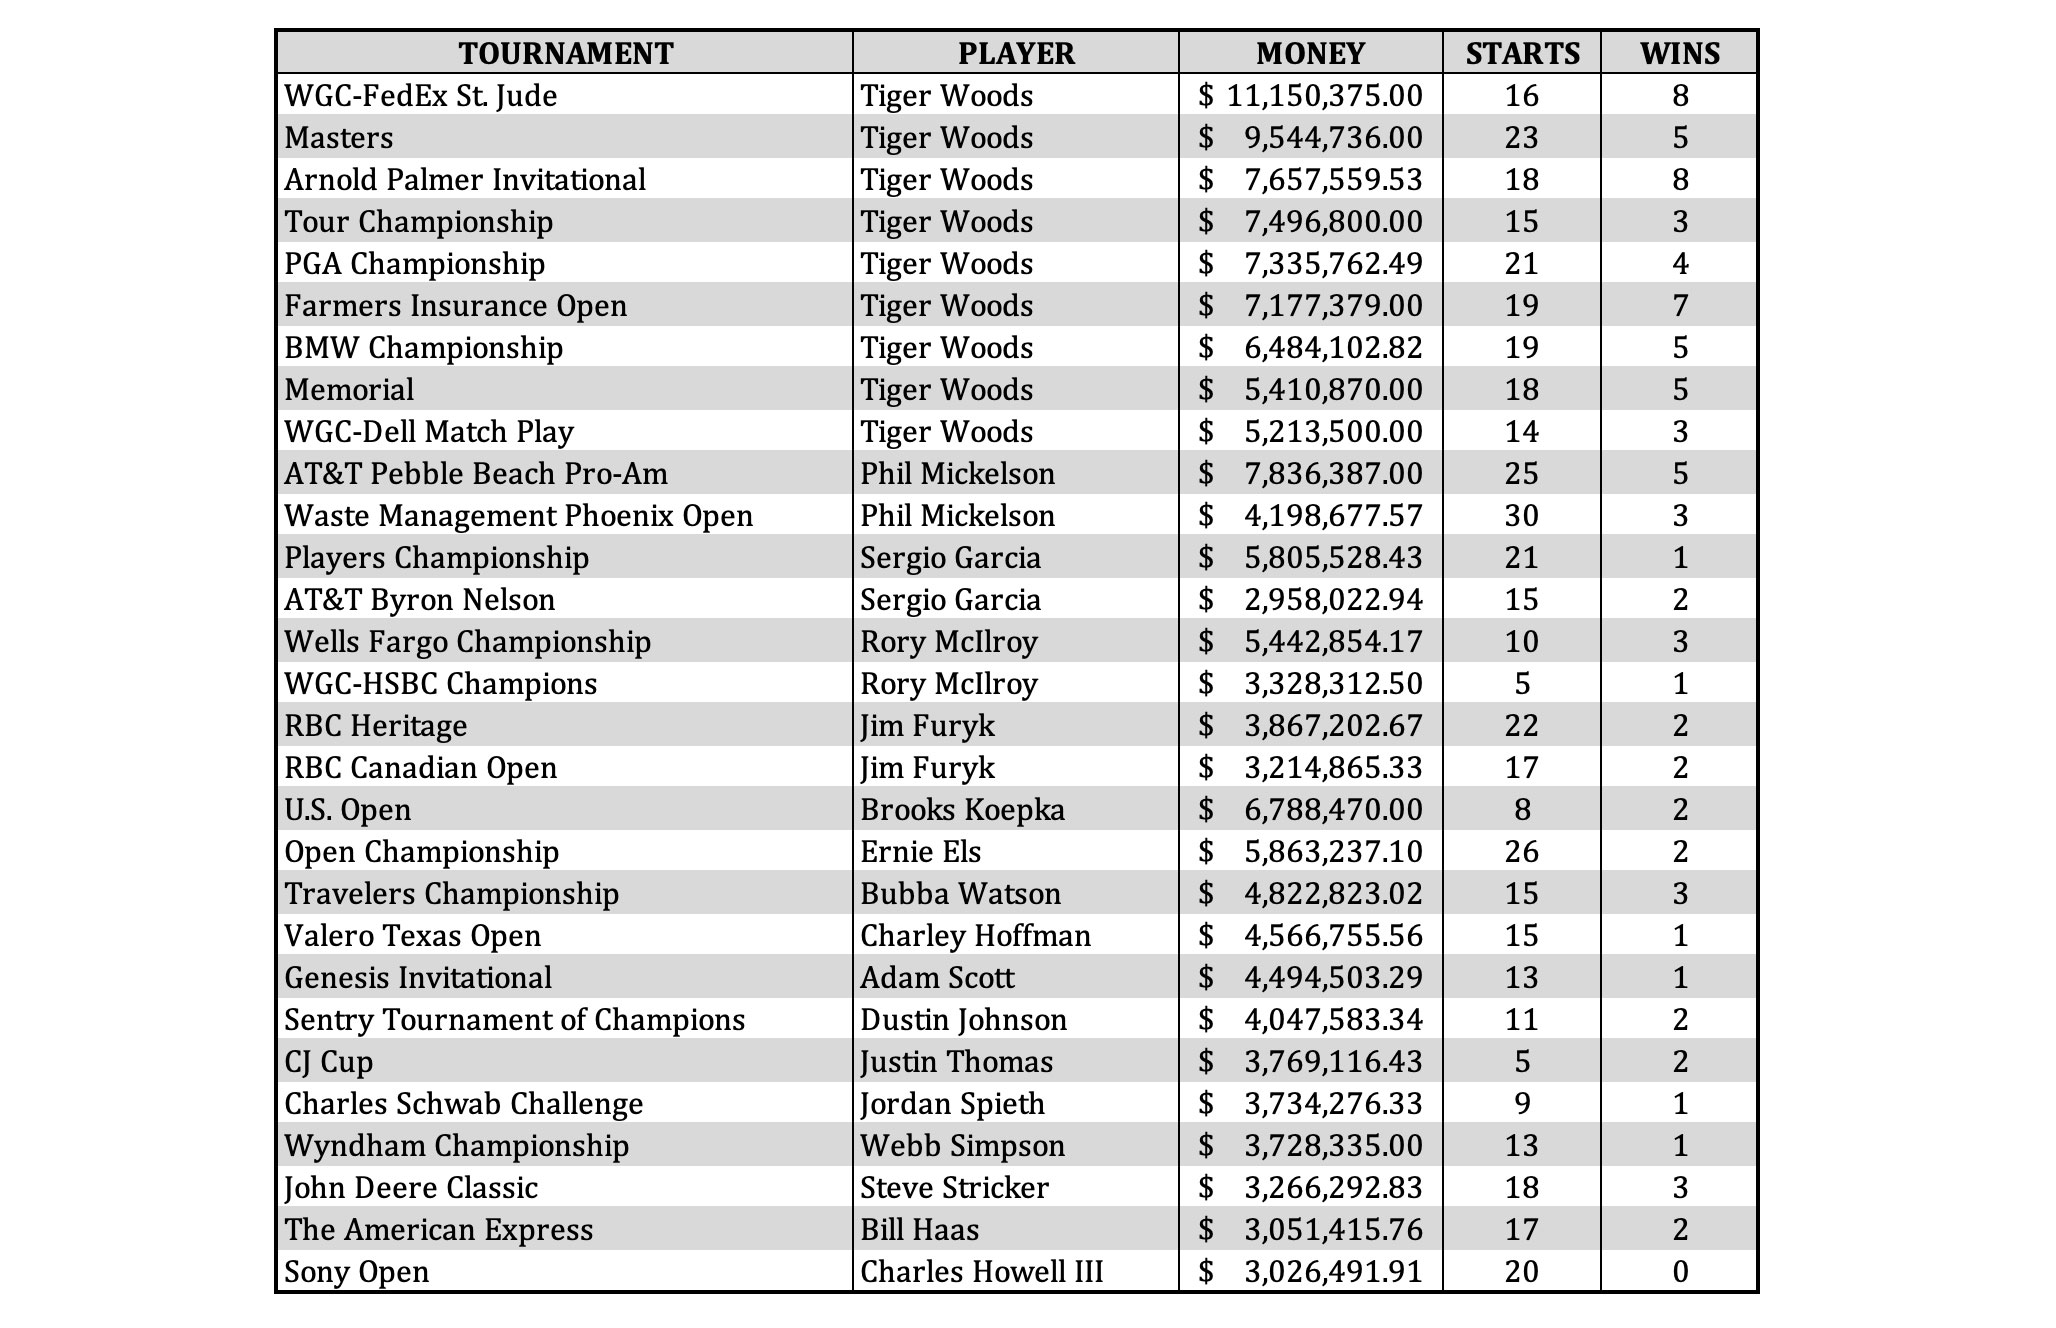 The list of the top career money winners in every current PGA Tour